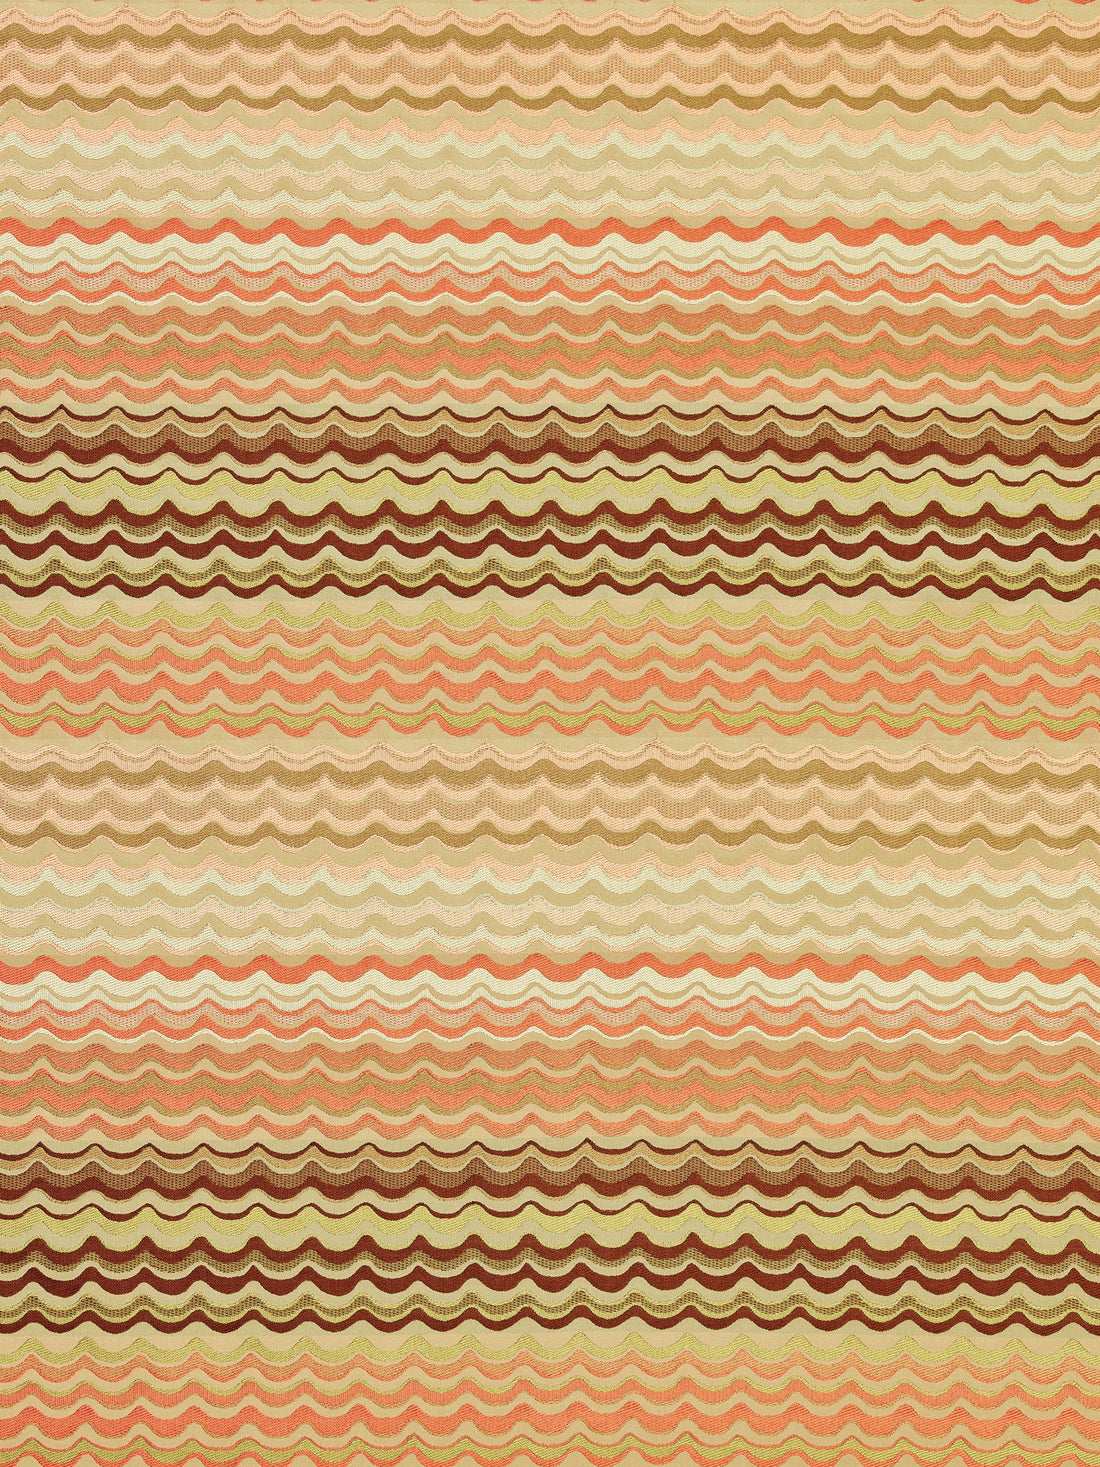 New Wave fabric in coral color - pattern number AB 00026512 - by Scalamandre in the Old World Weavers collection